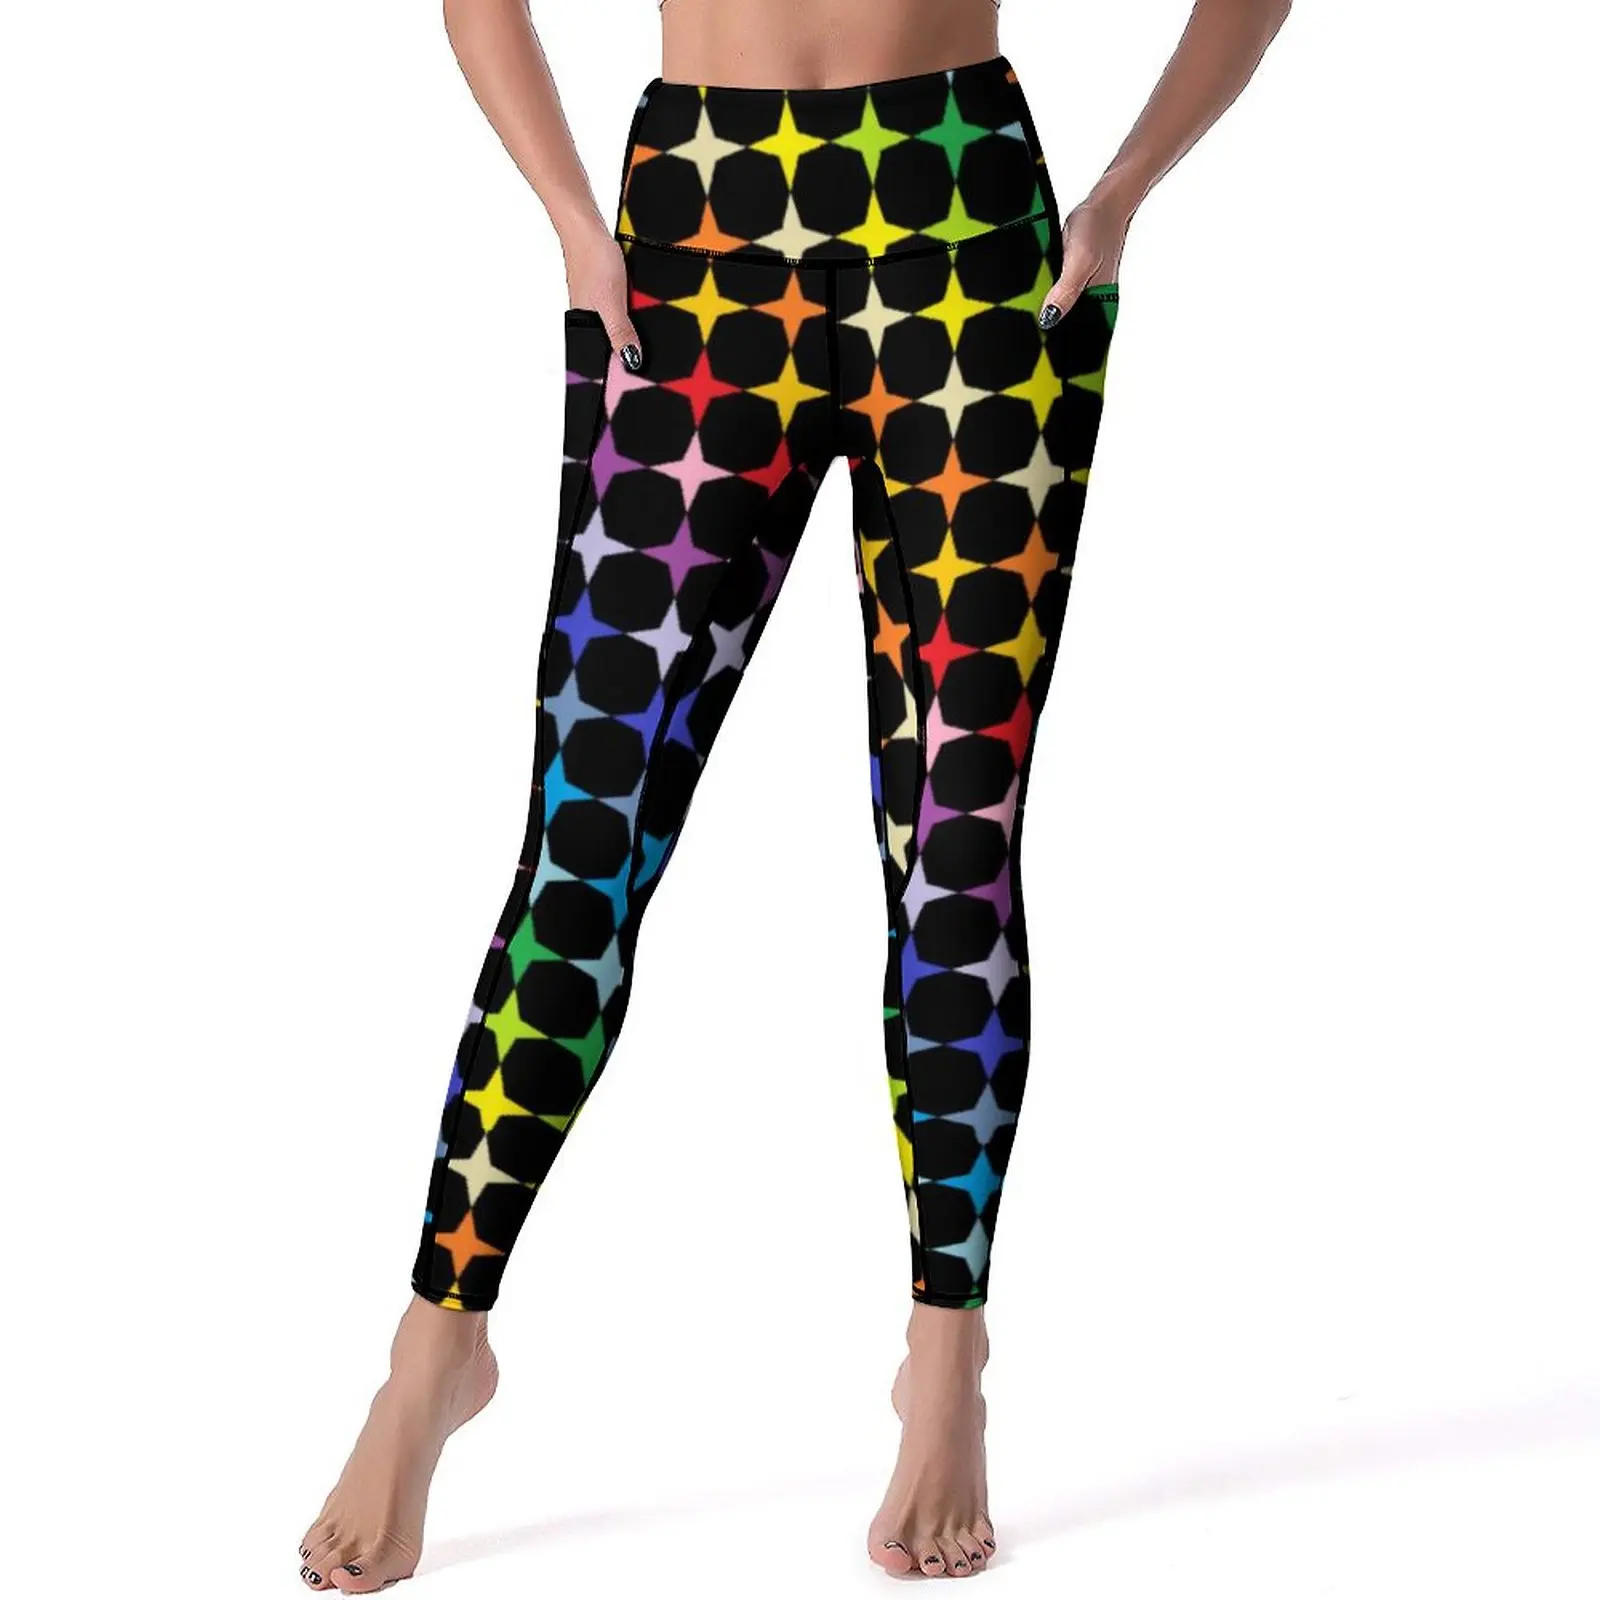 

Abstract Stars Leggings Sexy Rainbow Print Fitness Gym Yoga Pants Push Up Stretchy Sports Tights Pockets Casual Graphic Leggins